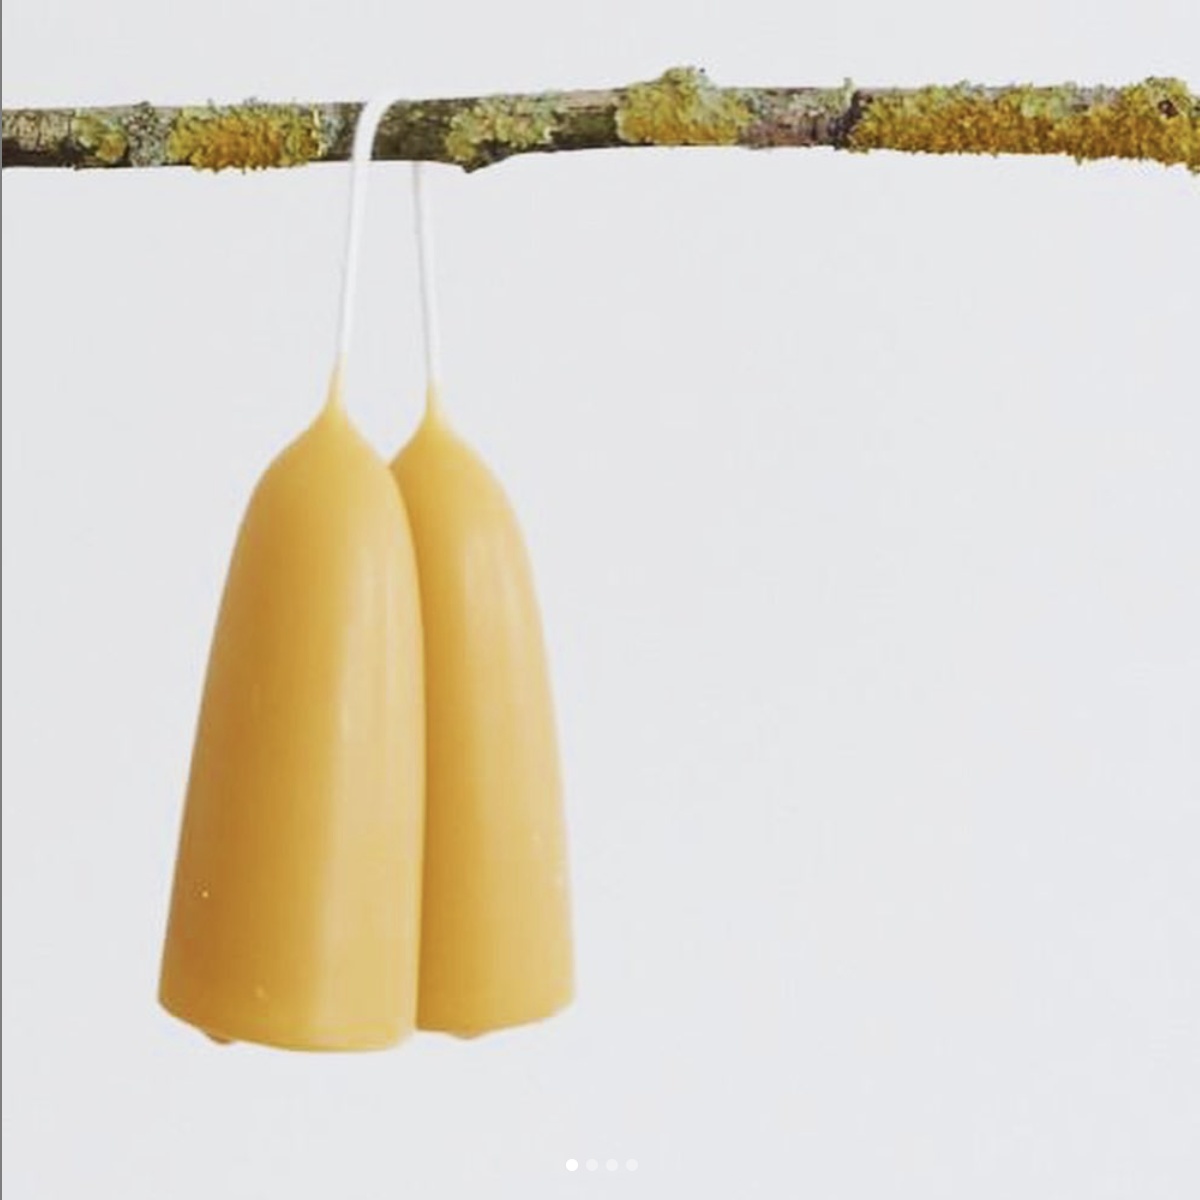 Dipped Beeswax Long Burning Candles - 2 pack, 12cm